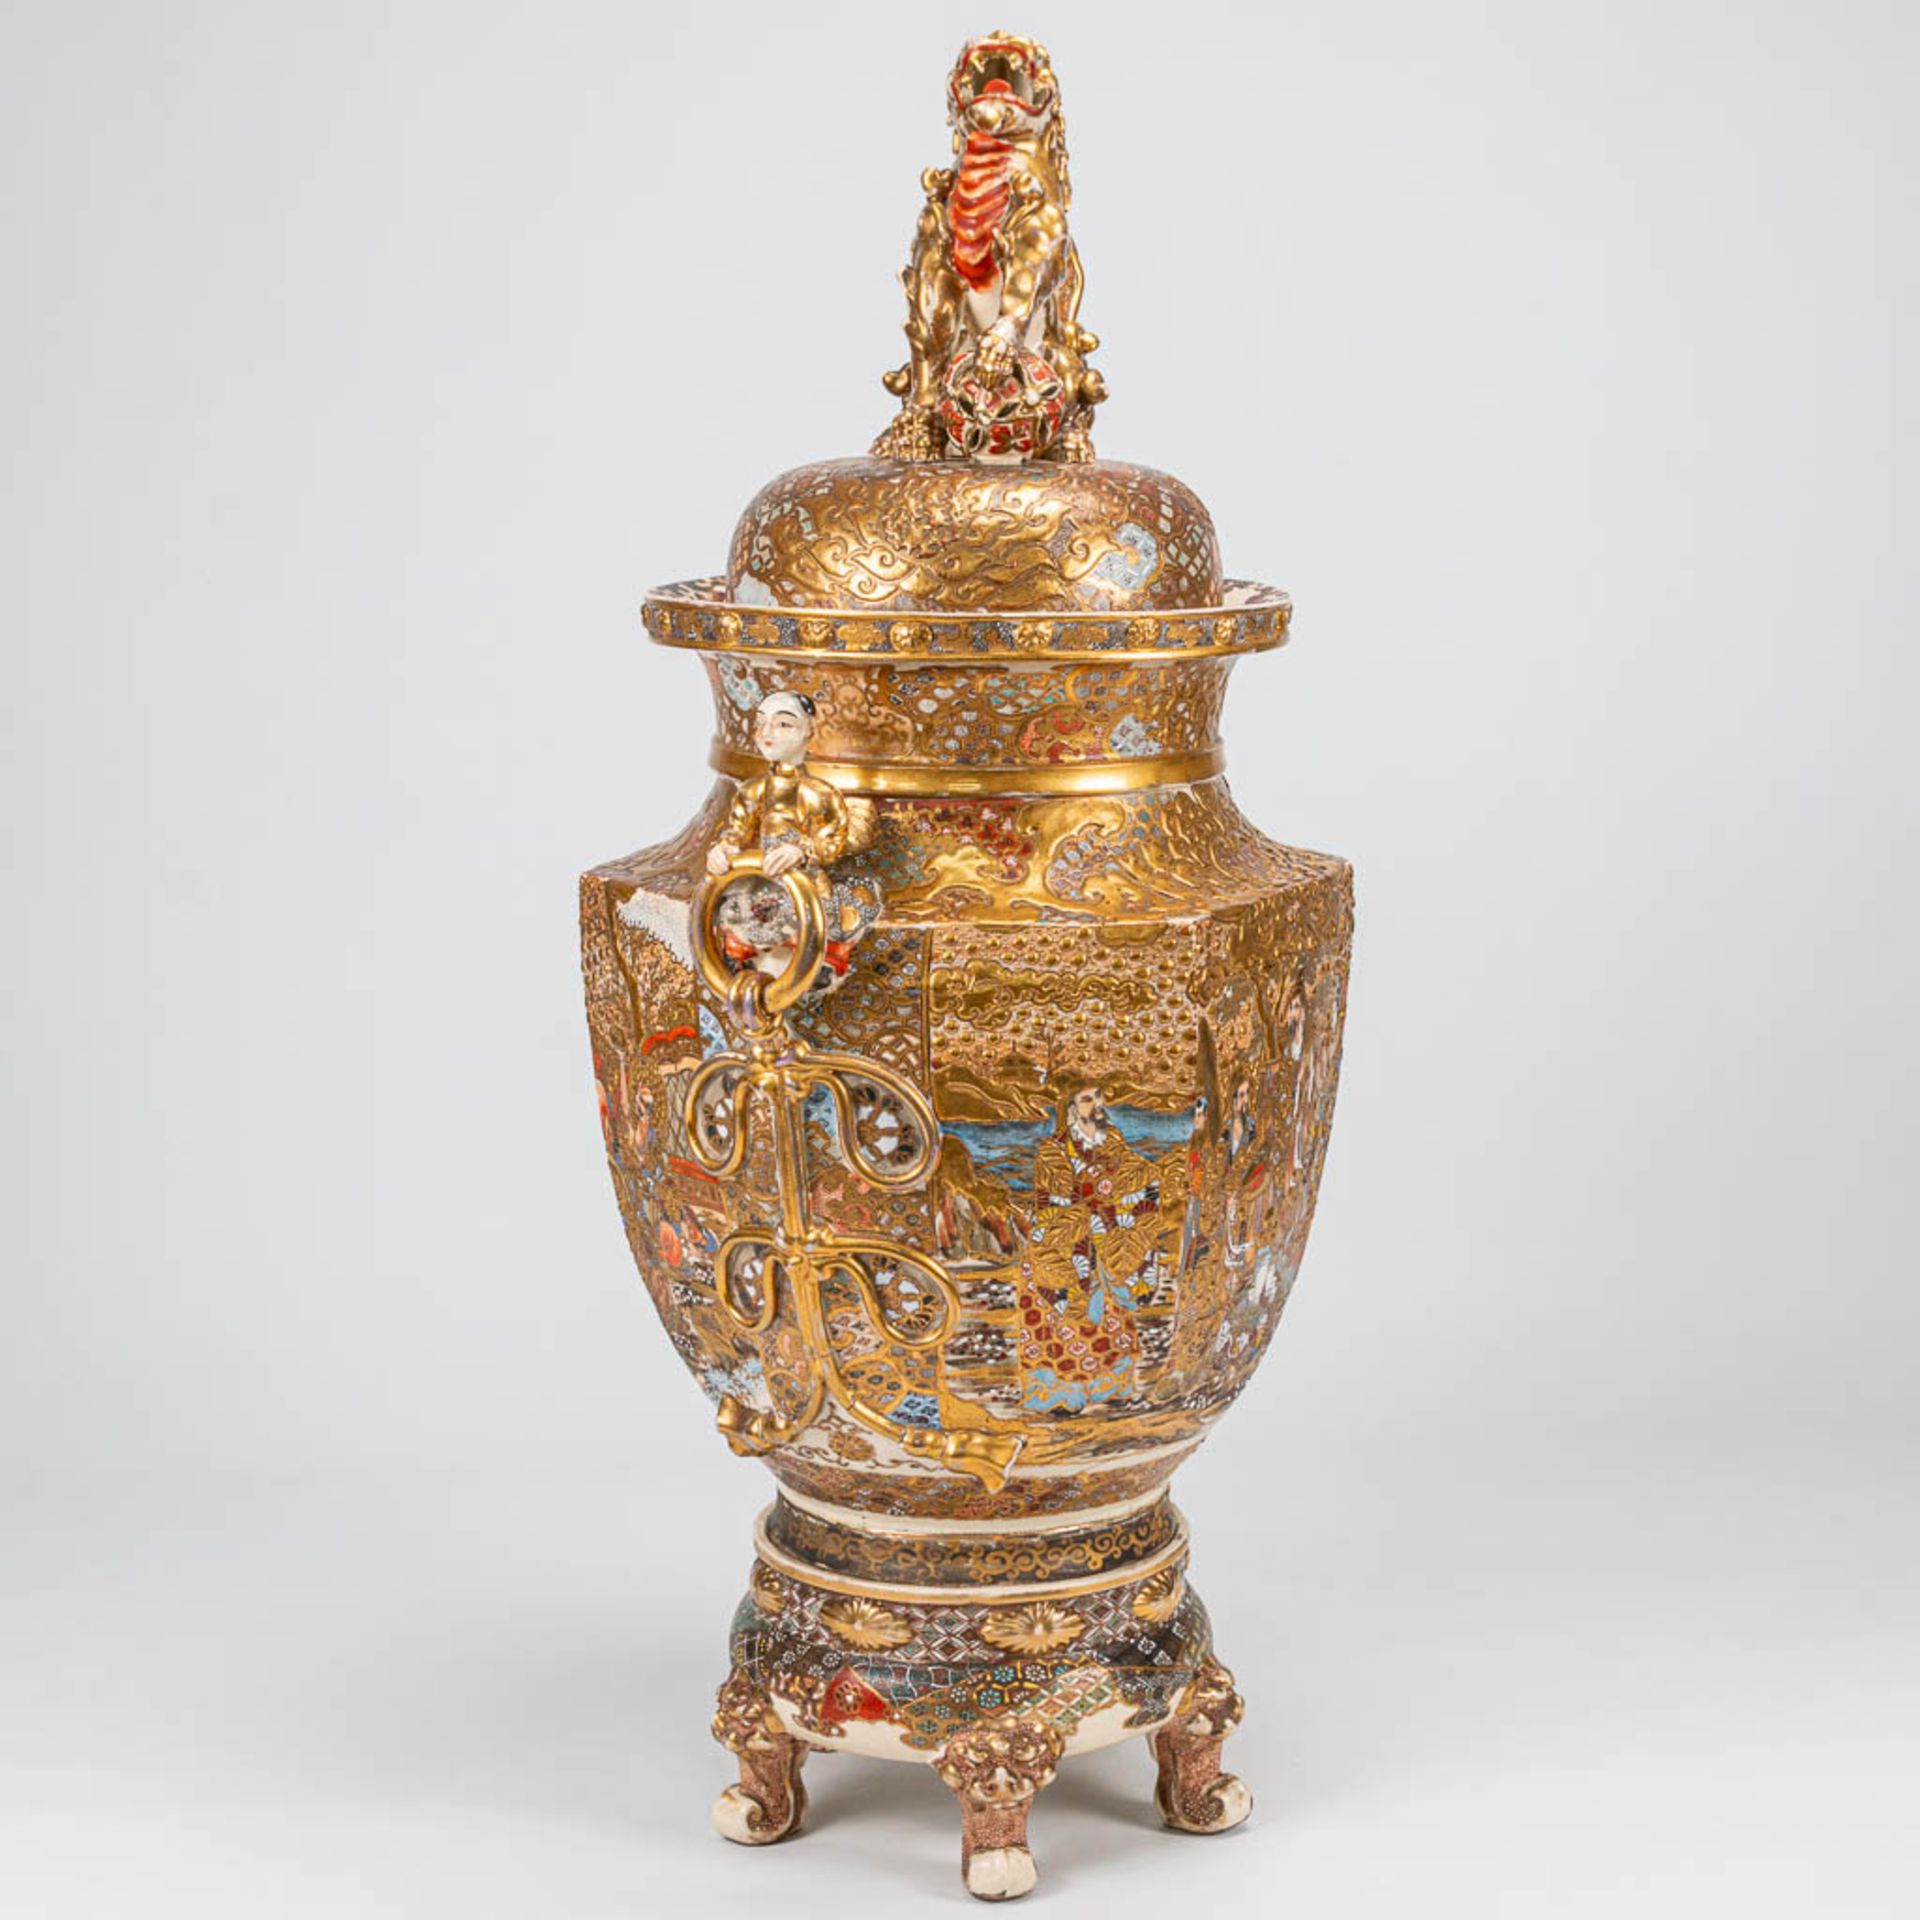 An exceptionally large Satsuma vase with lid on ceramic base, Emperor decor, Japan 19th century. - Image 5 of 31